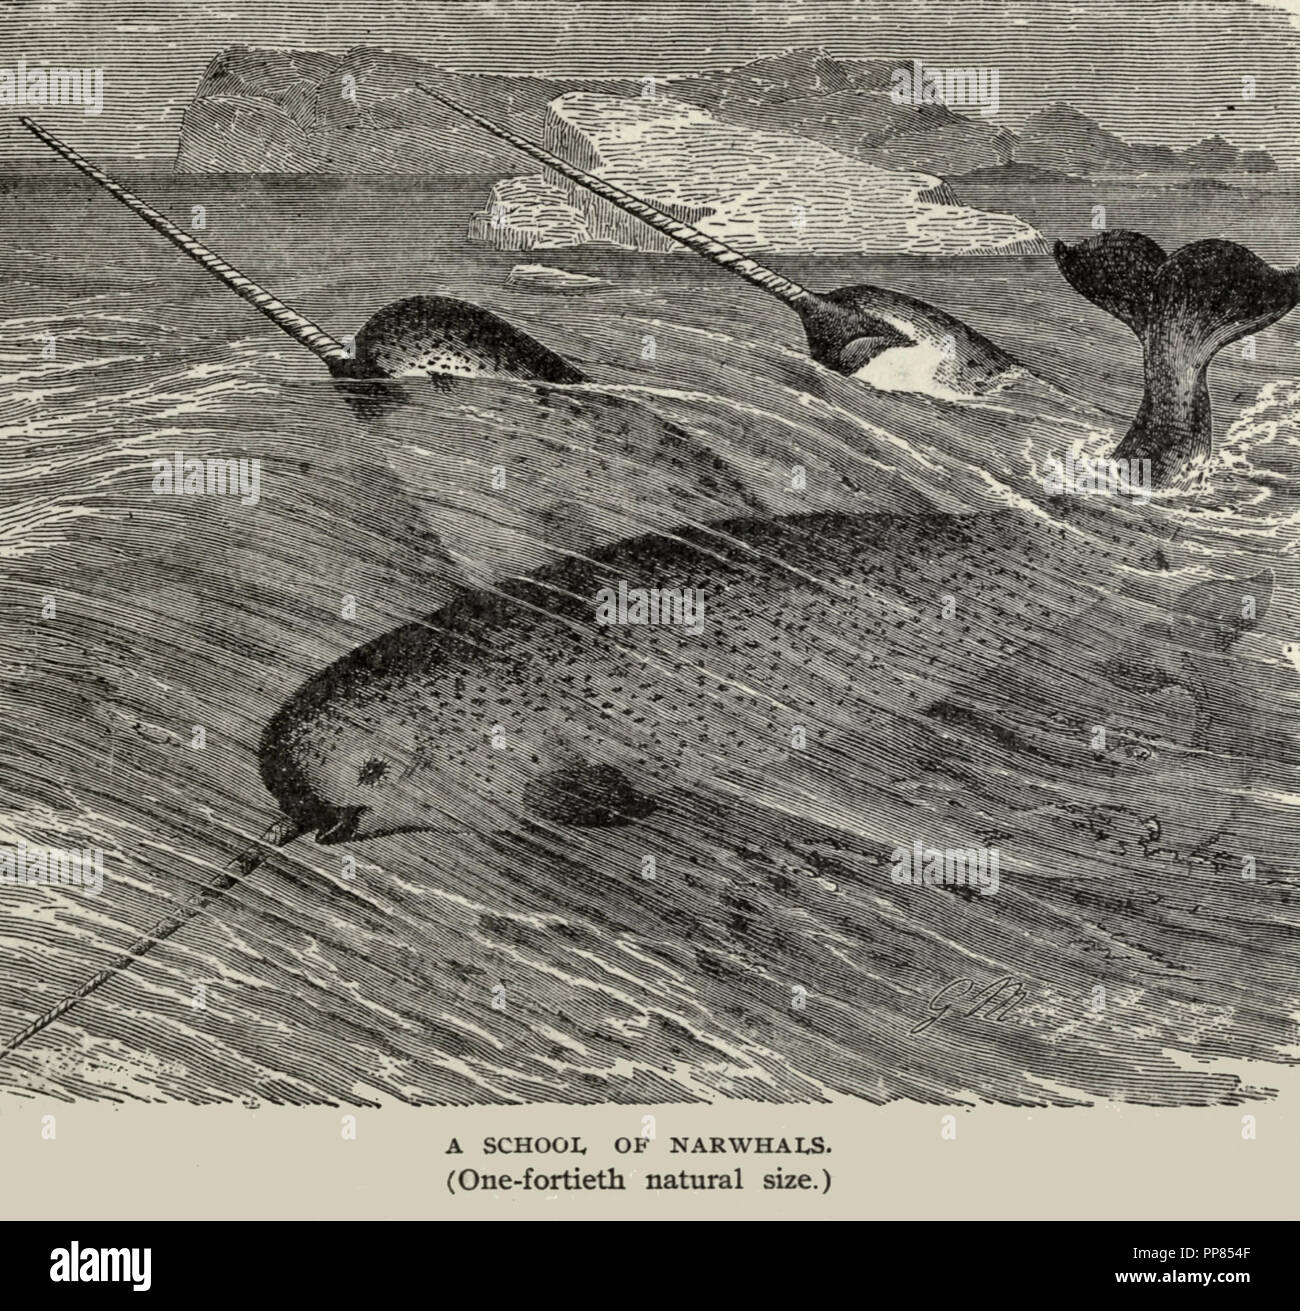 A school of Narwhals (one-fortieth natural size), circa 1900 Stock Photo